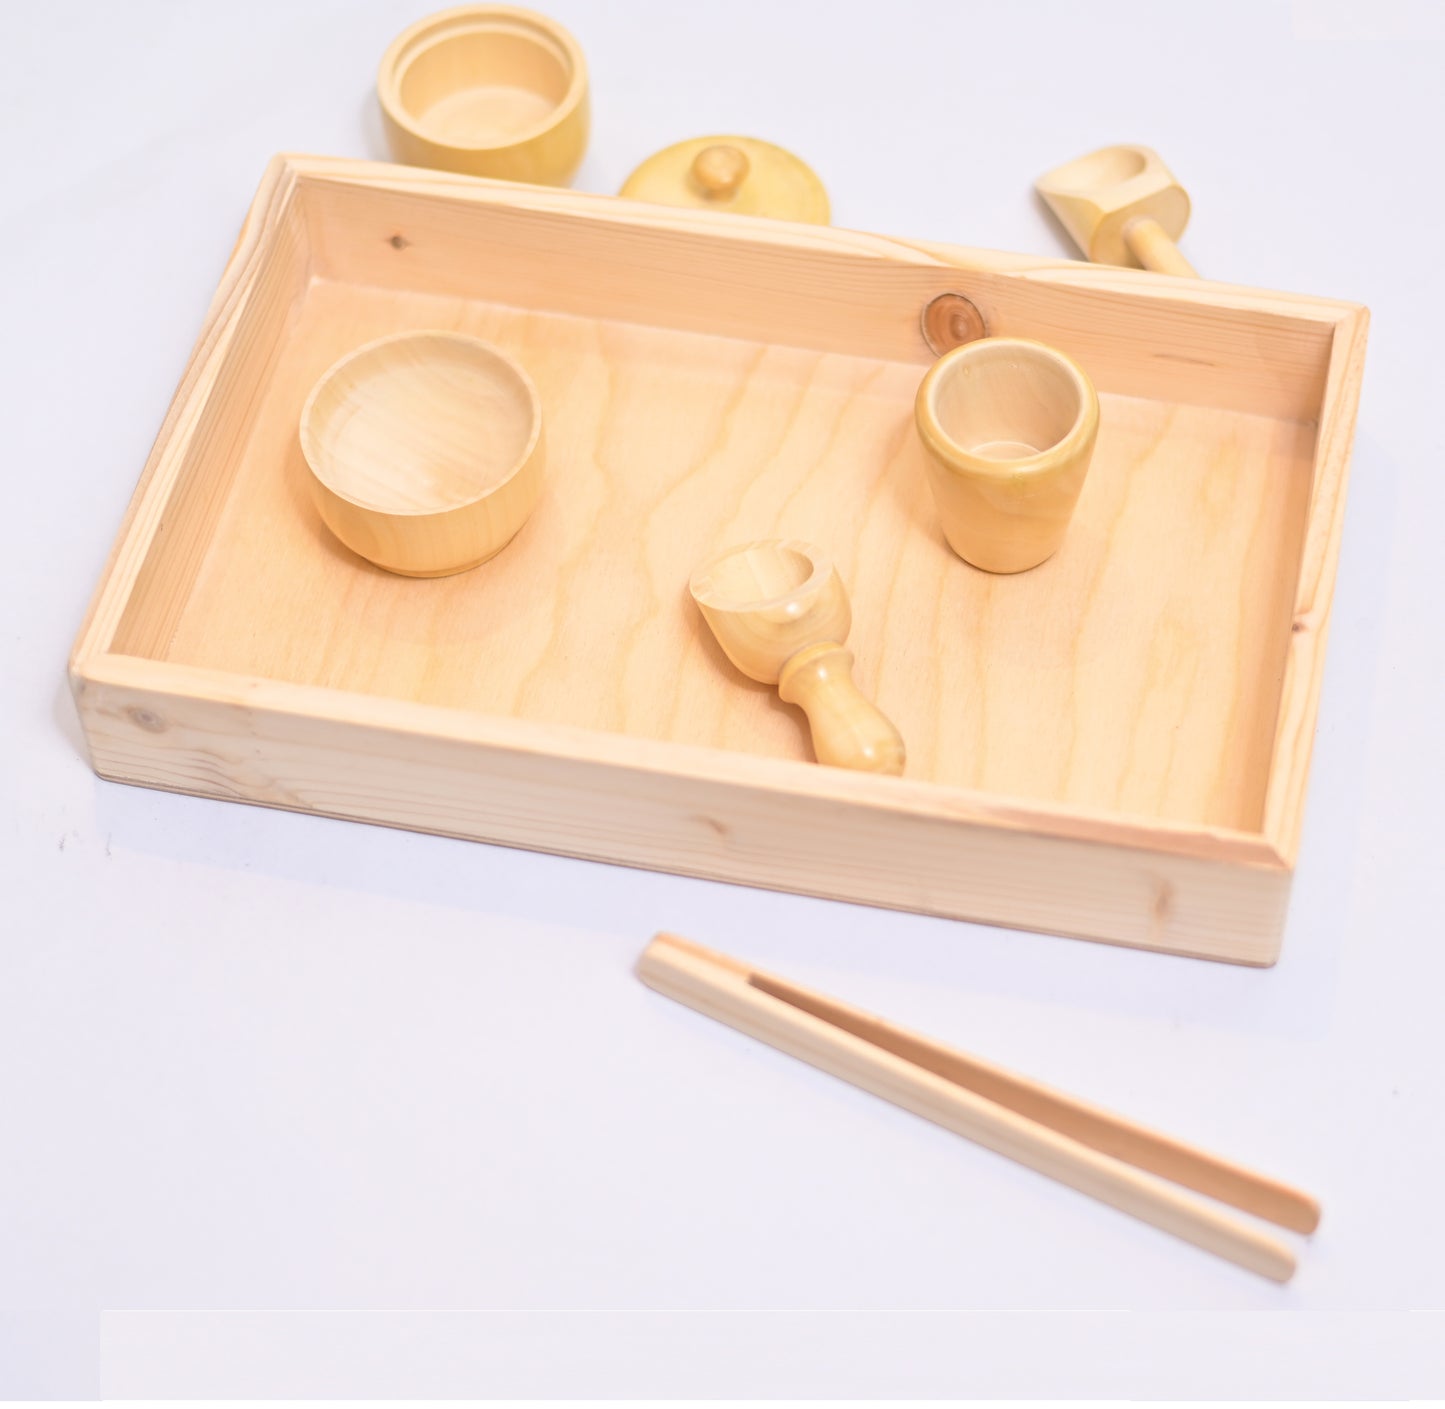 Sensory Tools with Tray for Kids